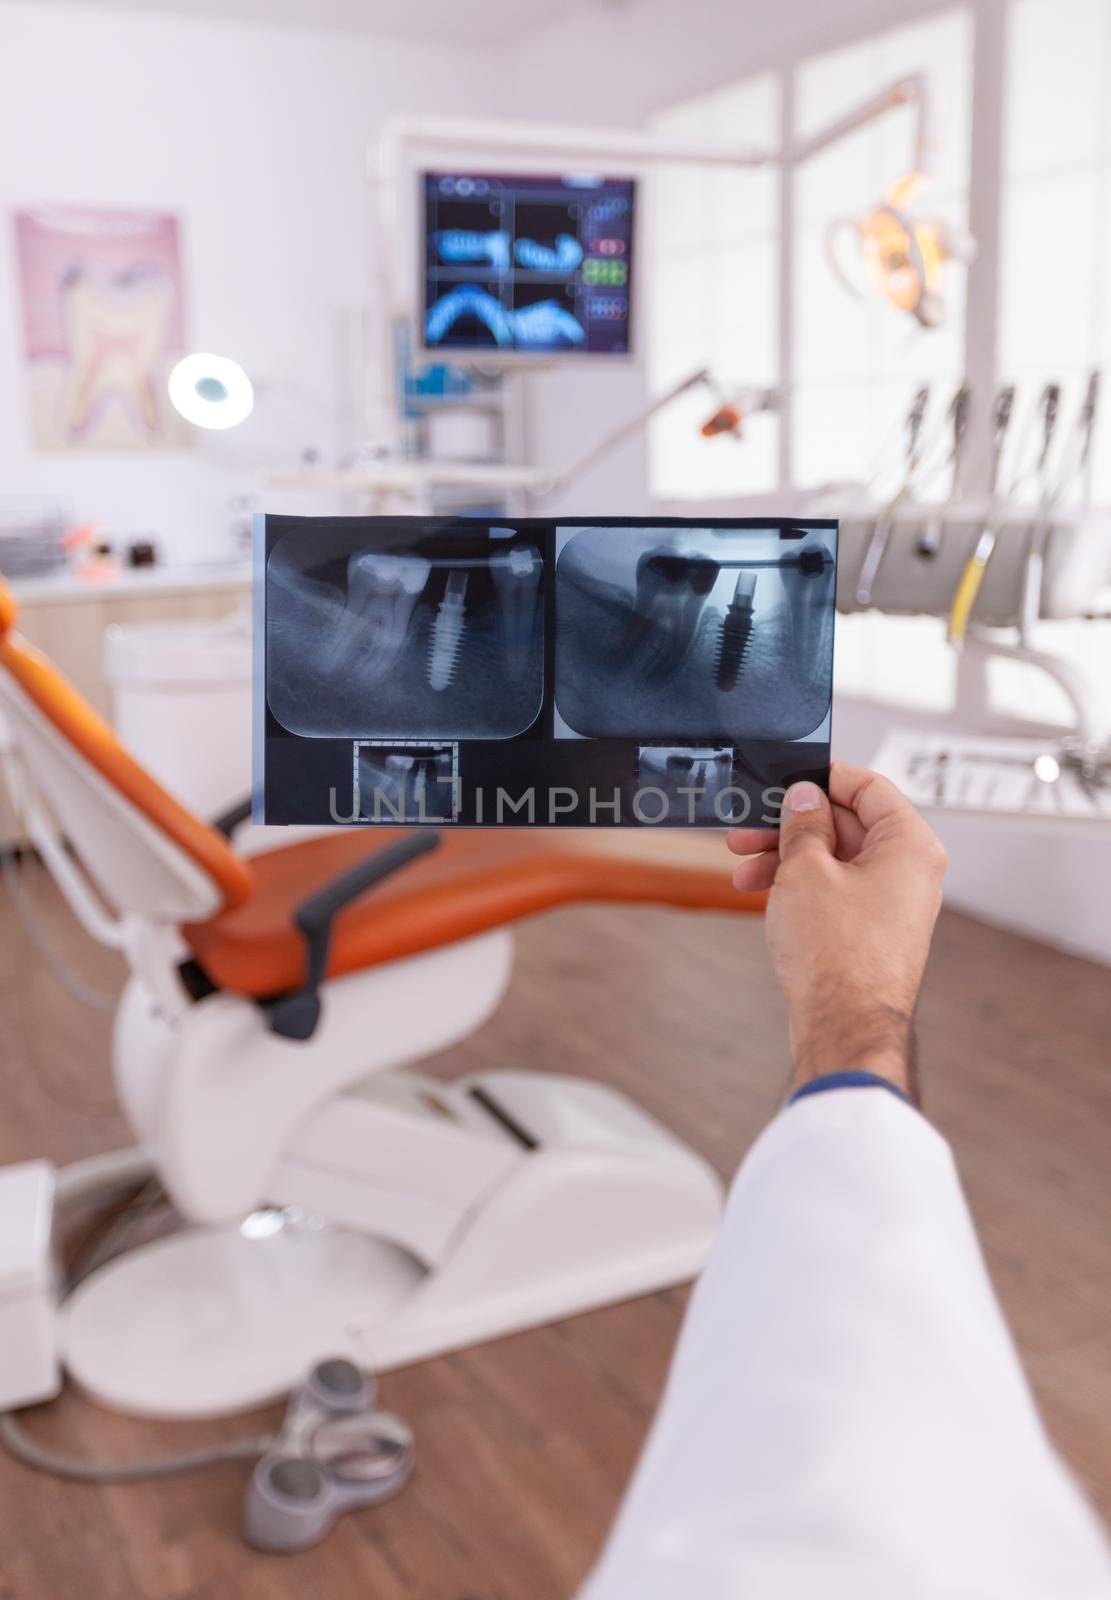 Radiologist looking at dental teeth jaw medical radiography working at teethcare treatment in stomatology orthodontic hospital diagnosis room. Orthodontist doctor examining surgery expertise